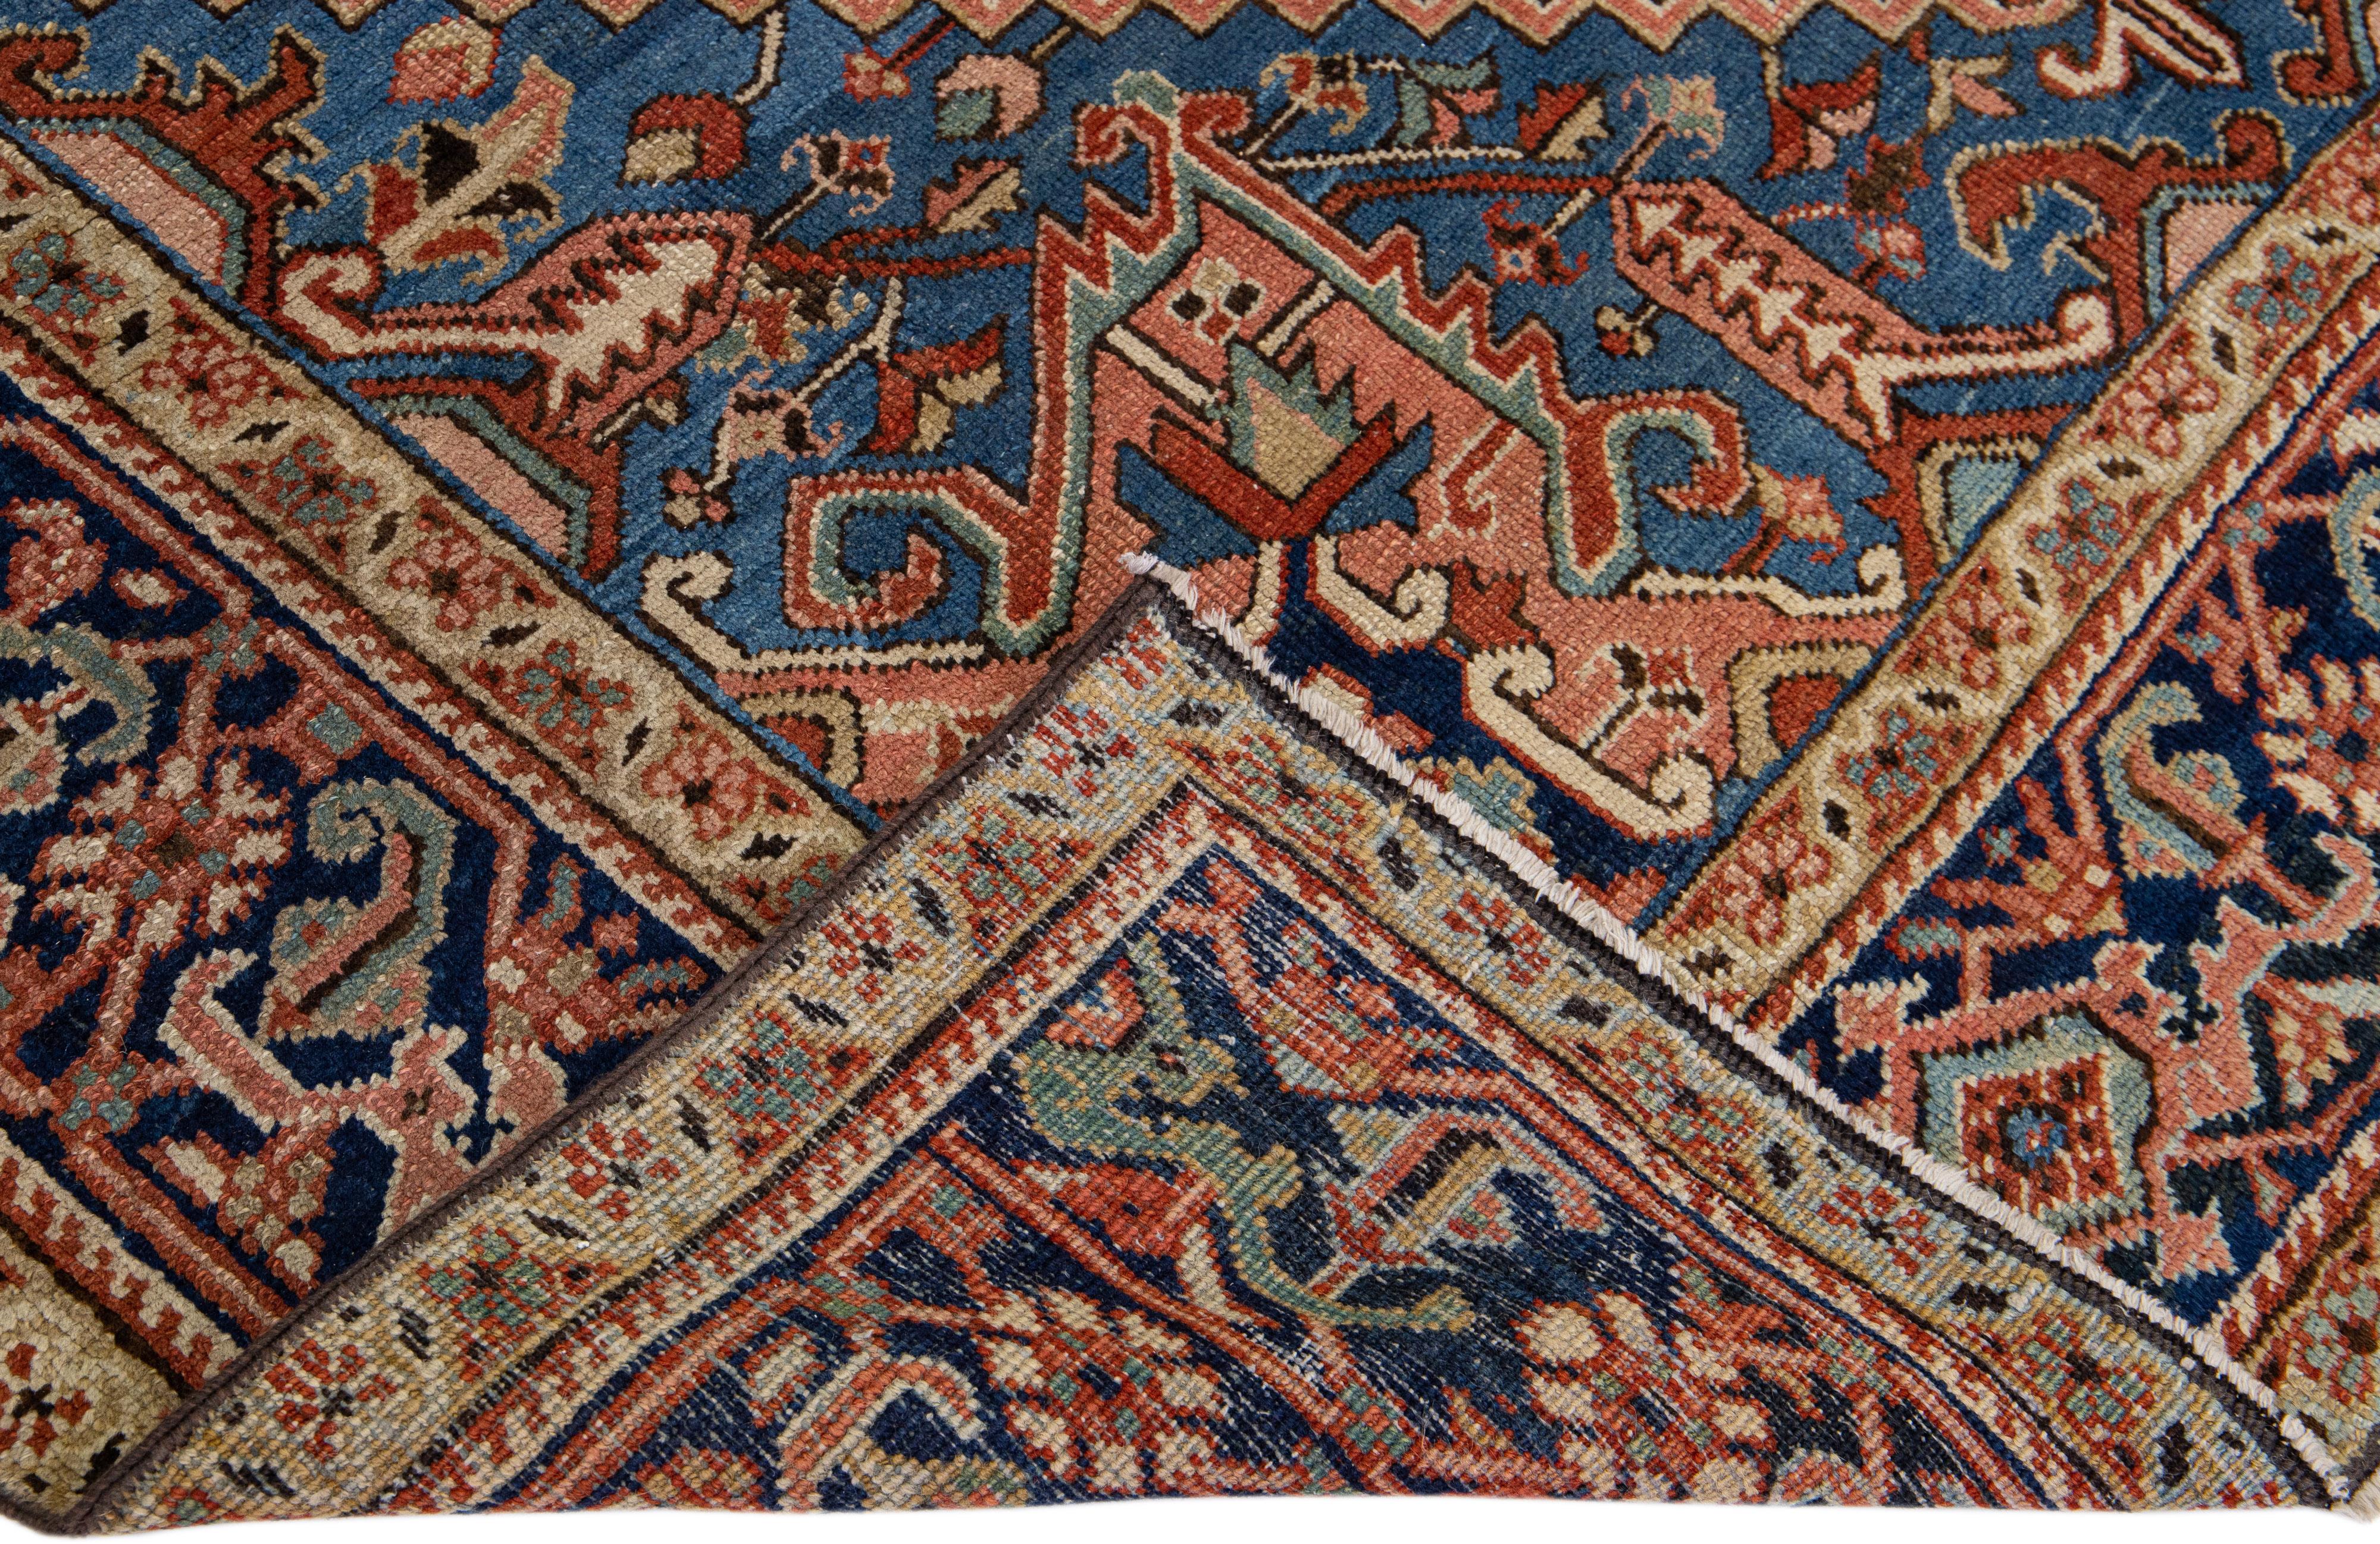 Beautiful antique Heriz hand-knotted wool rug with a rust field. This Heriz rug has a navy blue frame and multi-color accents in a gorgeous all-over Medallion floral design.

This rug measures: 7'8